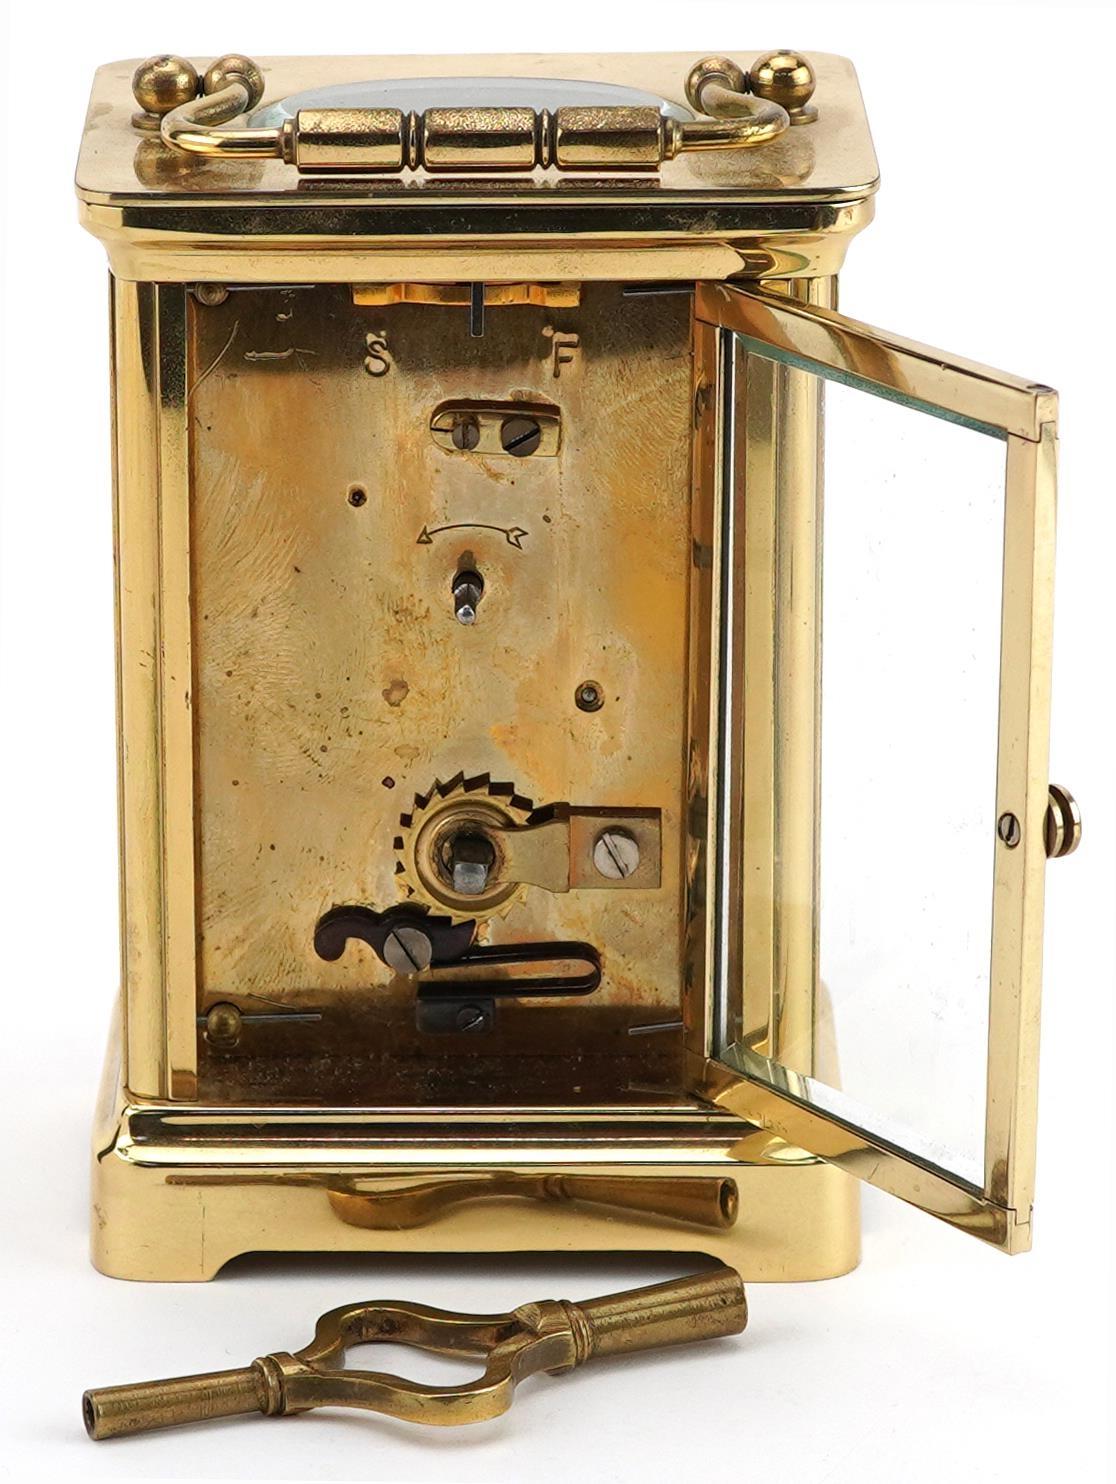 Brass cased Henley carriage clock, 11.5cm high excluding the swing handle - Image 3 of 5